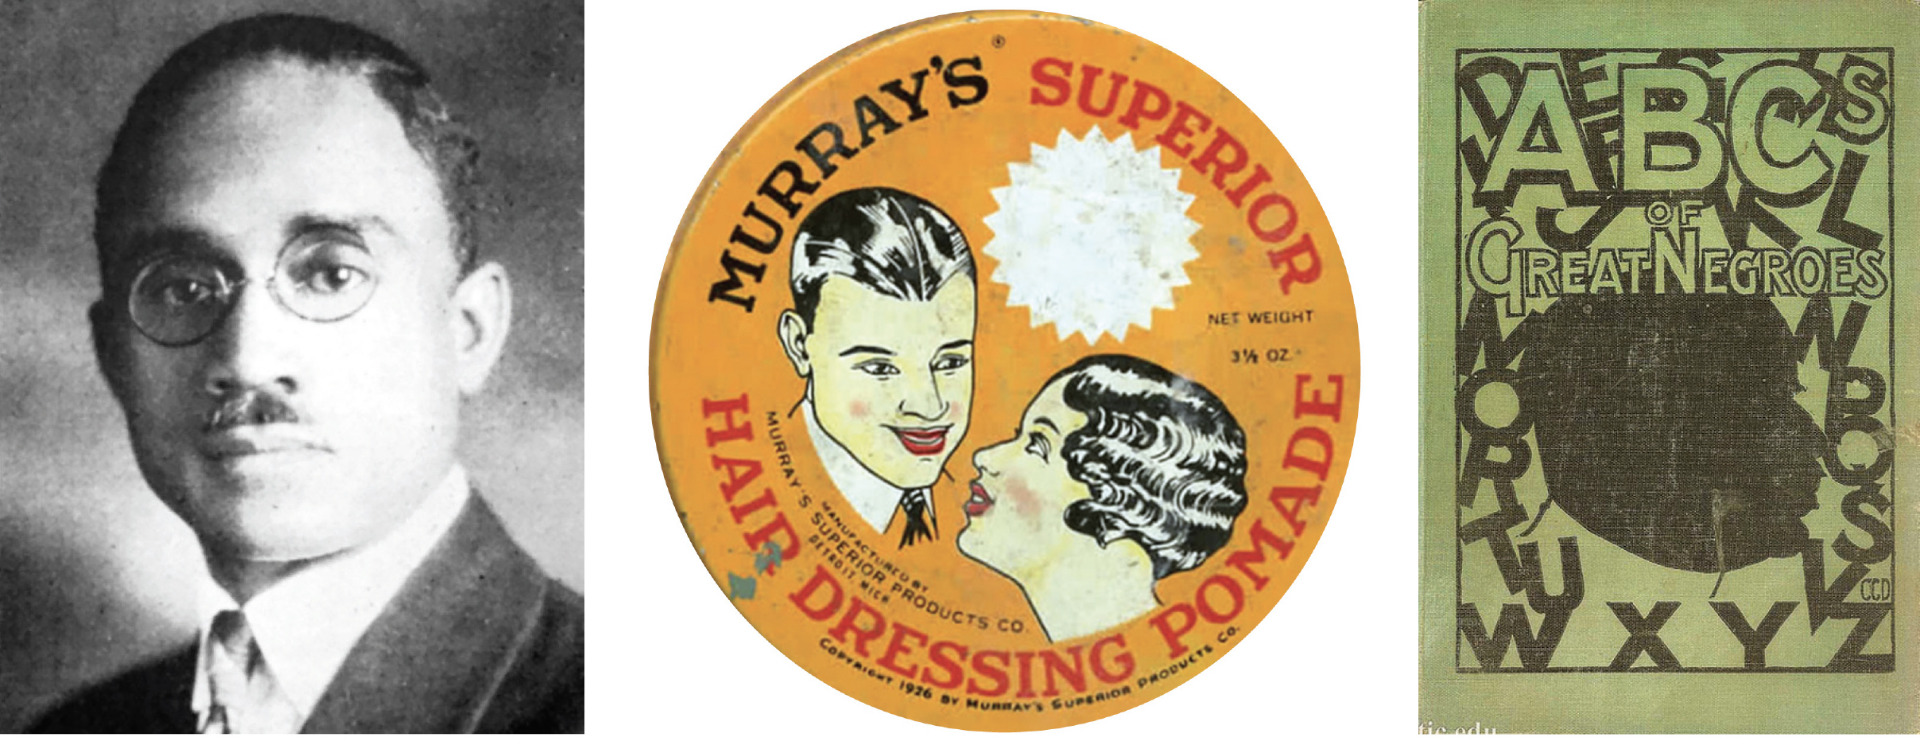 Illustration for Murray's Superior Hair Dressing Pomade, 1926. Printed tin  container top - Charles Dawson — Google Arts & Culture